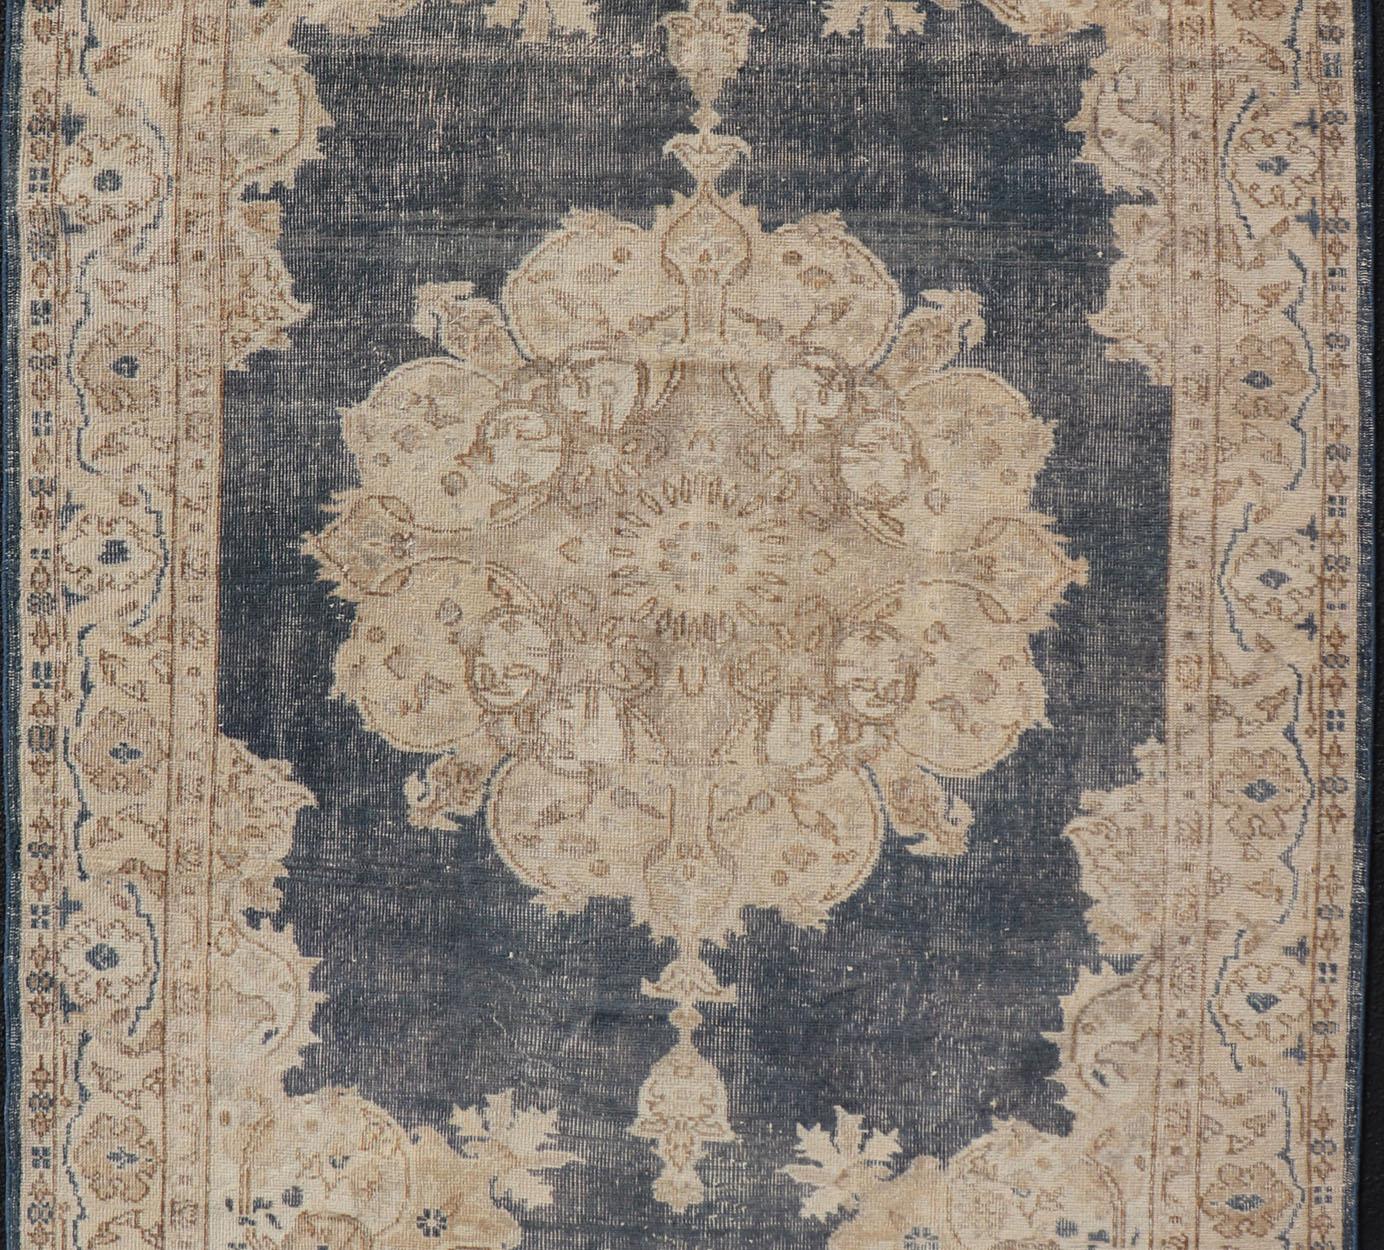 Distressed Turkish Carpet with Floral Design in Blue, Tan, Taupe, and Cream In Good Condition For Sale In Atlanta, GA